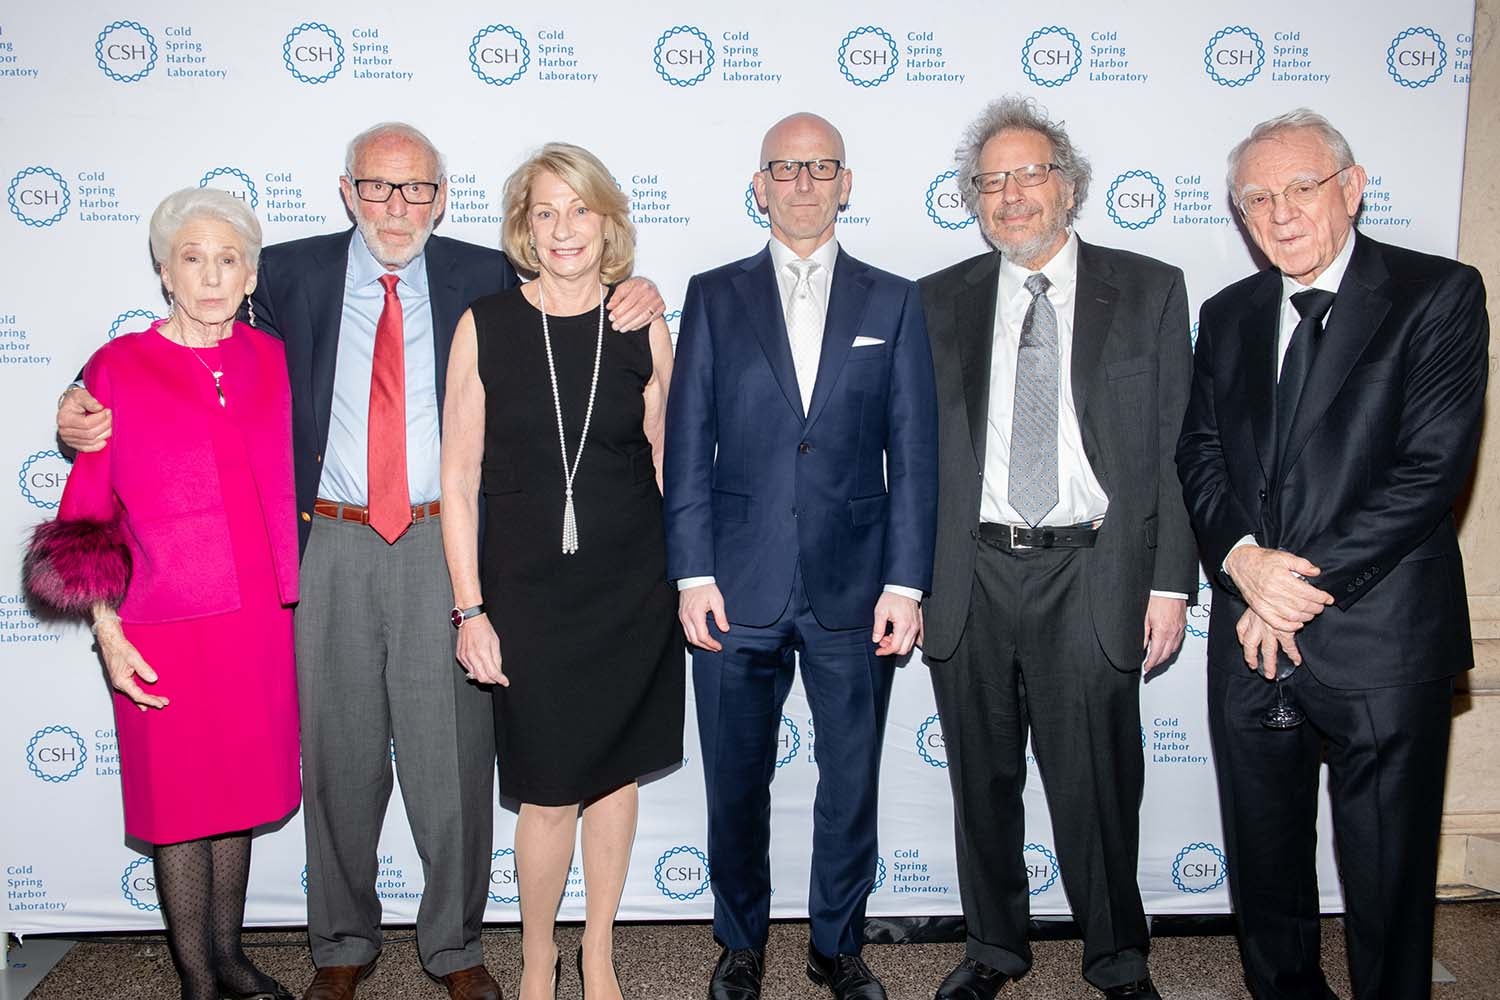 photo of Double Helix Medals Dinner 2019 - Marilyn and Jim Simons, Tony Zador, Nancy Wexler, Mike Wigler, Herb Pardes